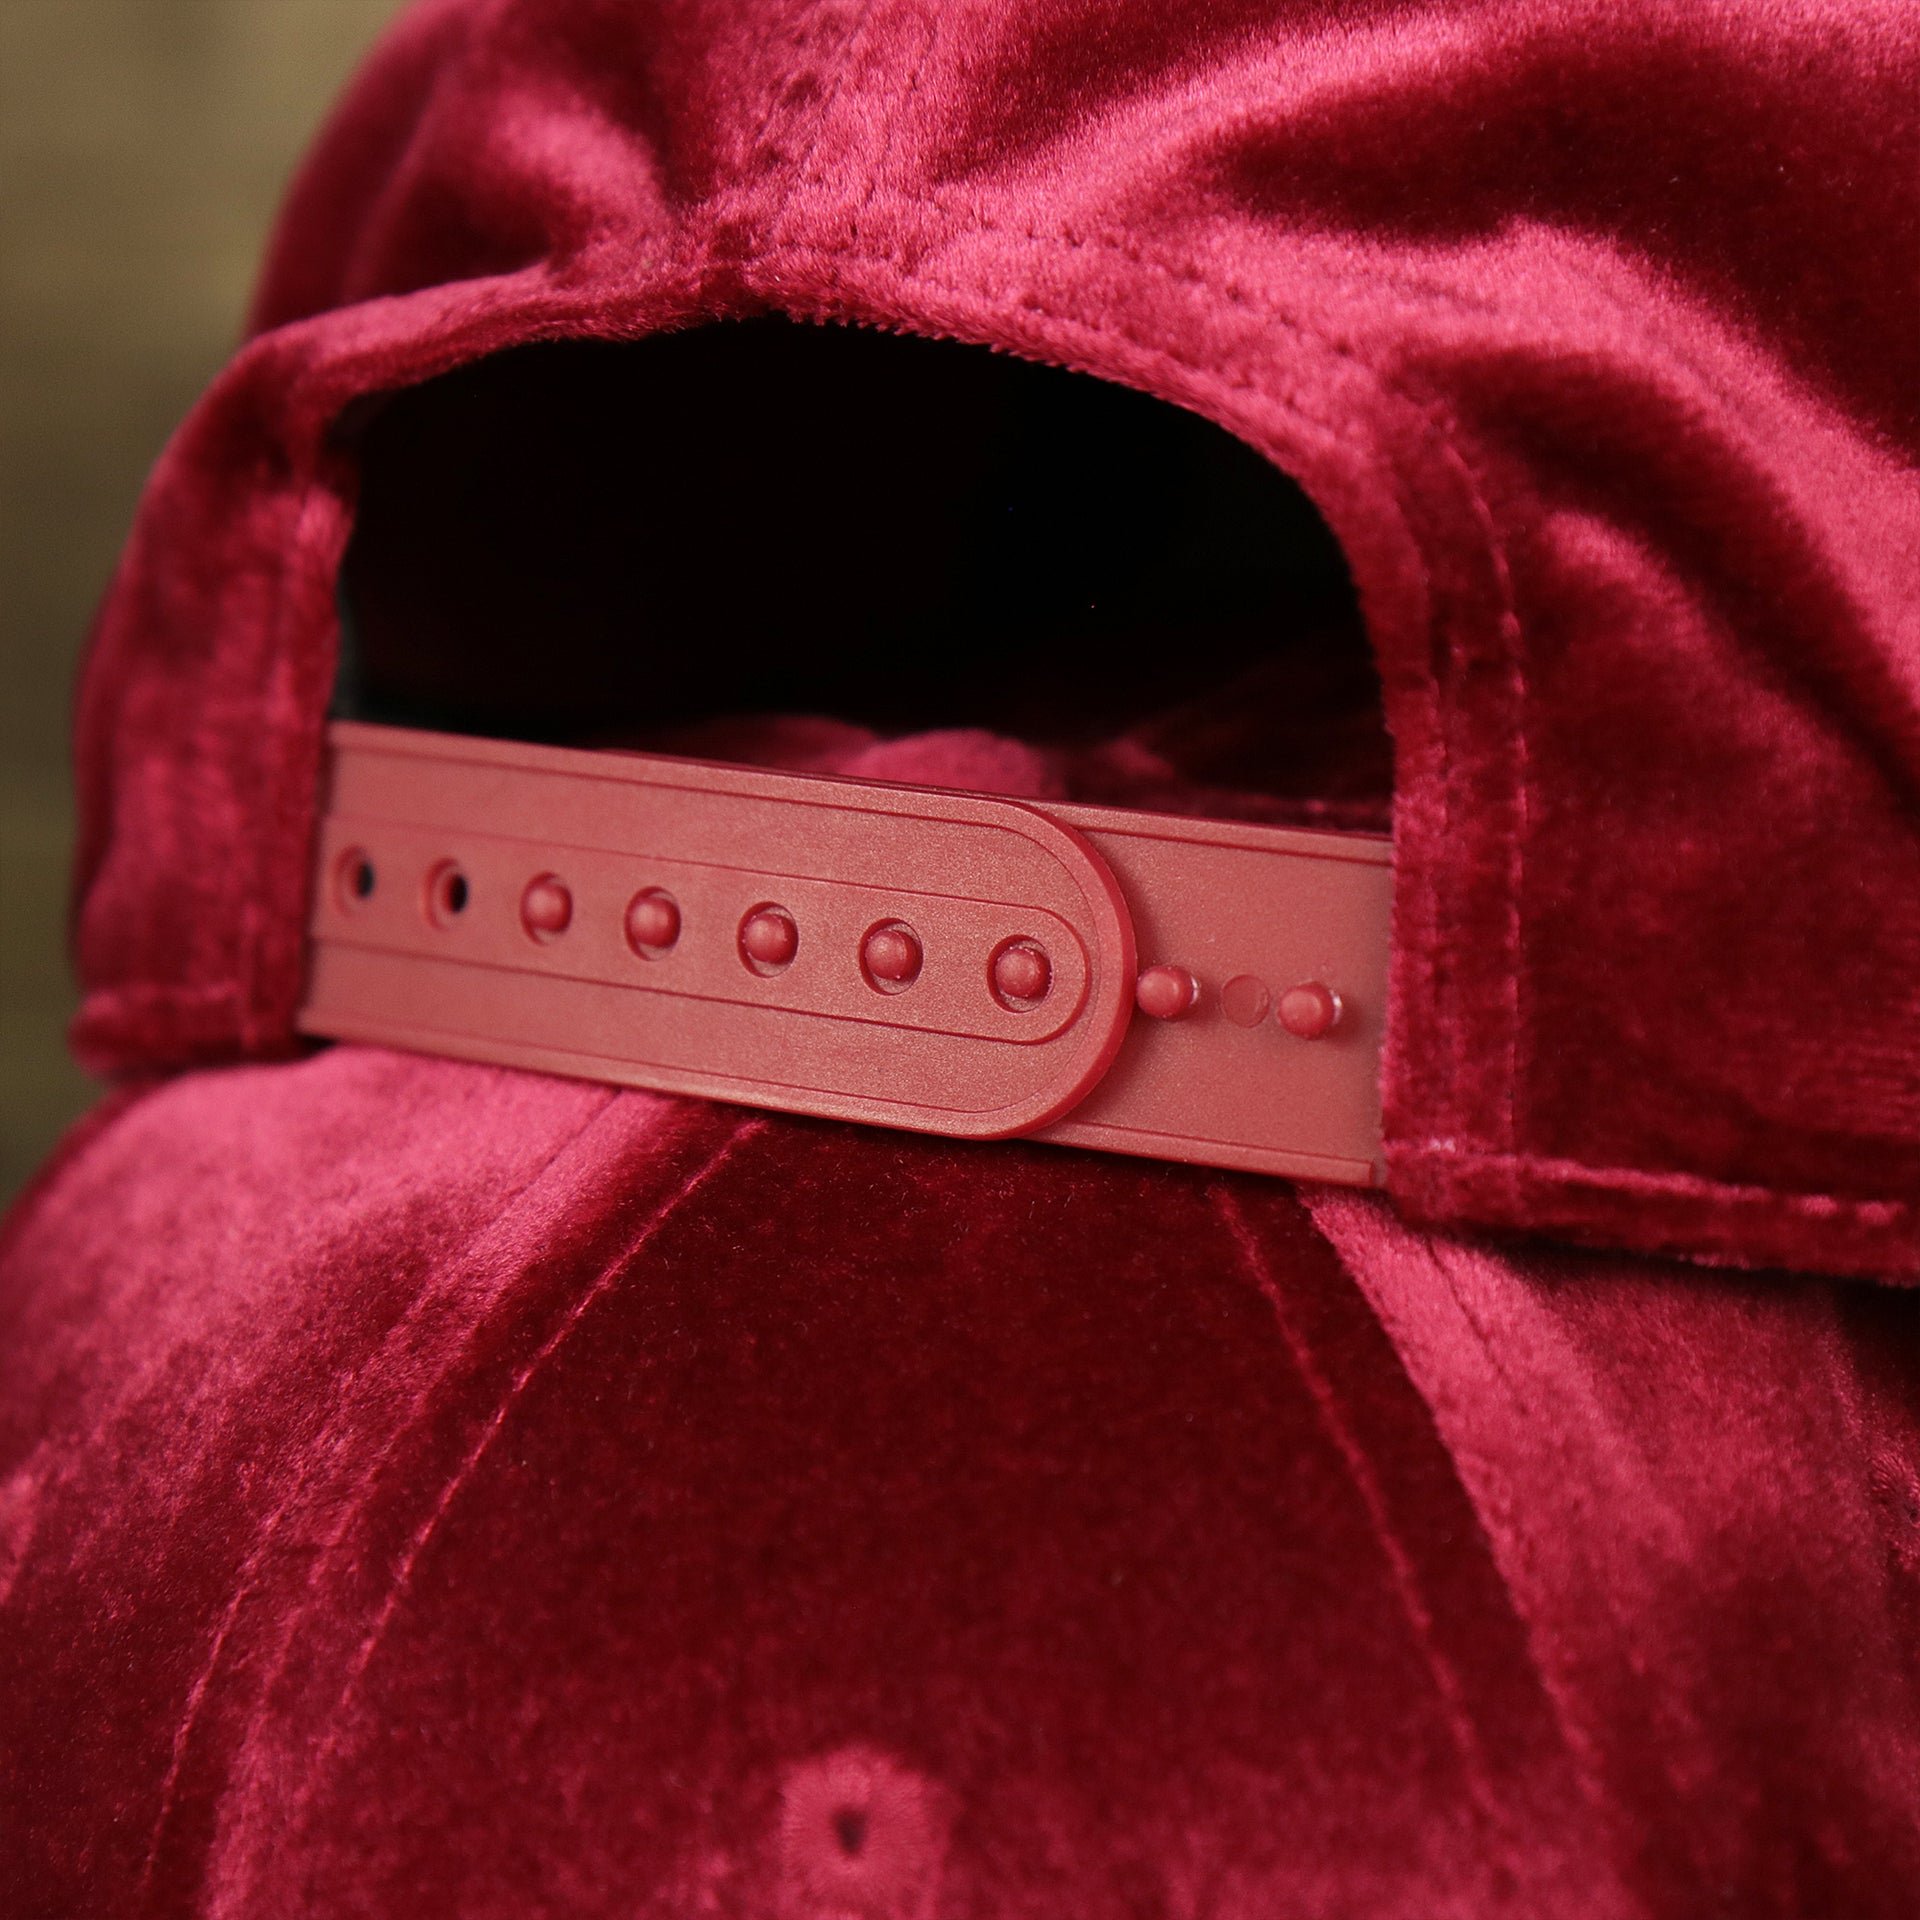 The Red Adjustable Strap on the Velour Blank Ox Blood Snapback Cap | Dark Red Snap Cap